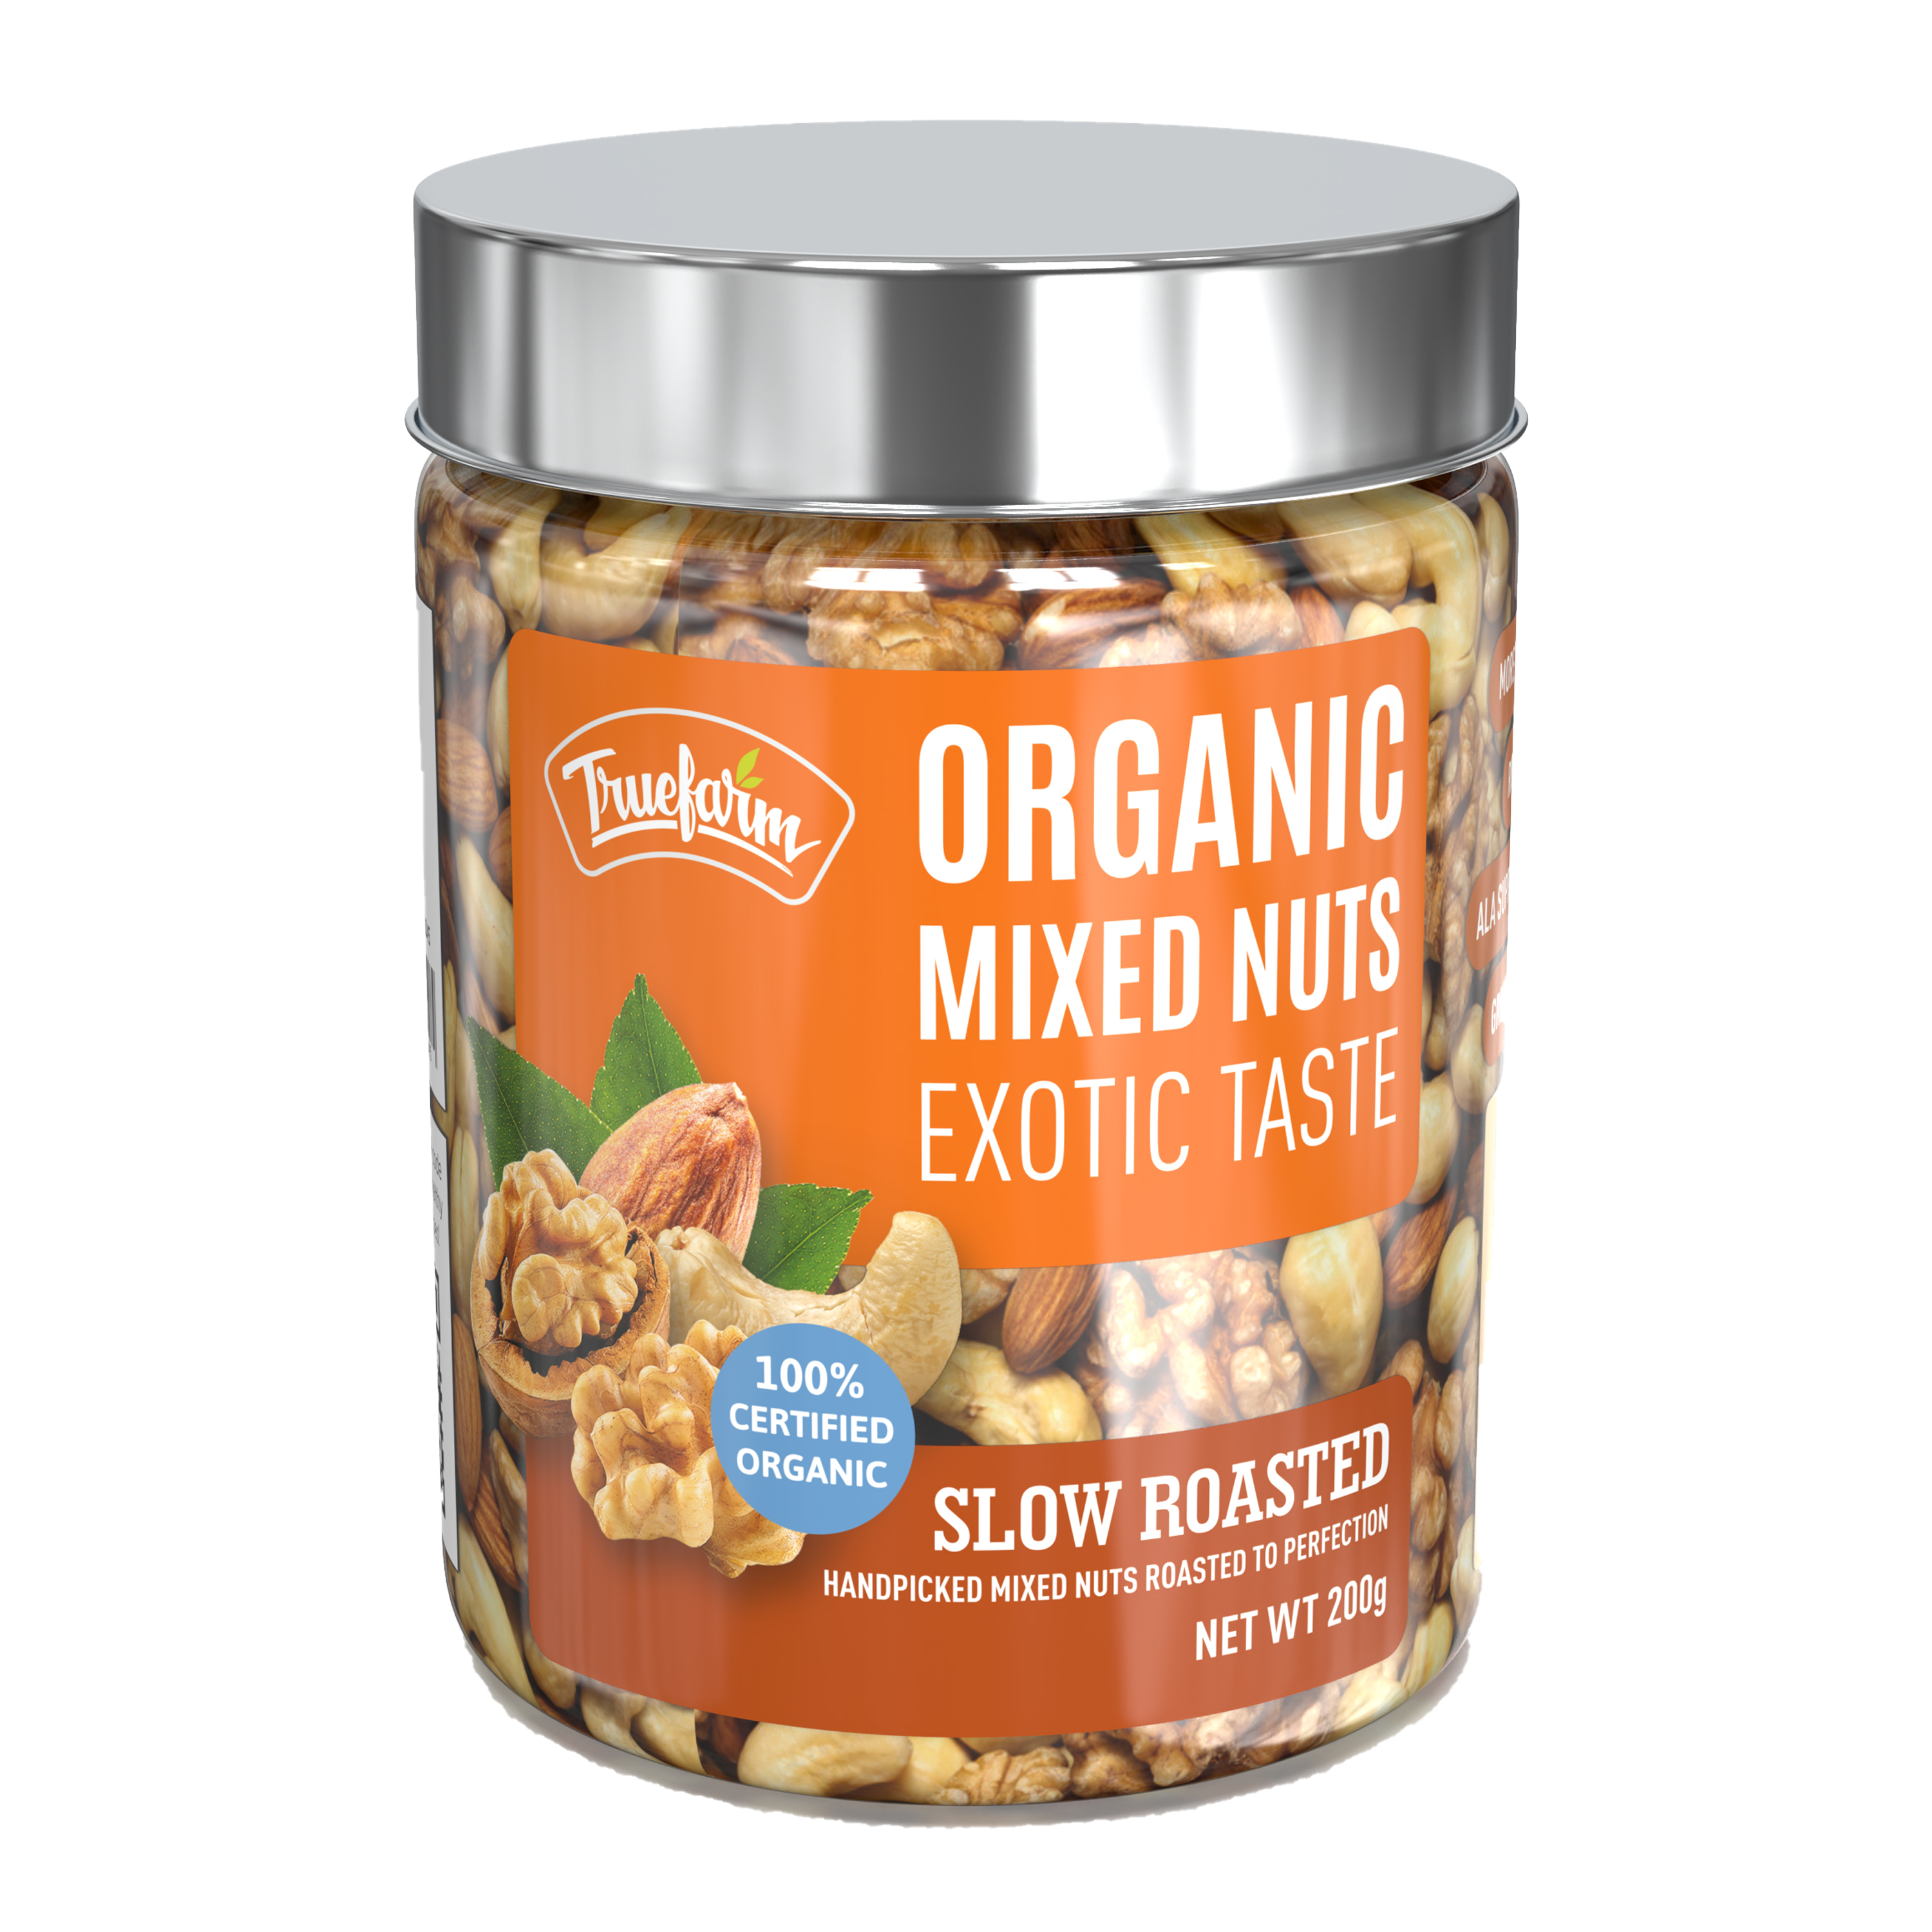 Organic Roasted Mixed Nuts (250g)